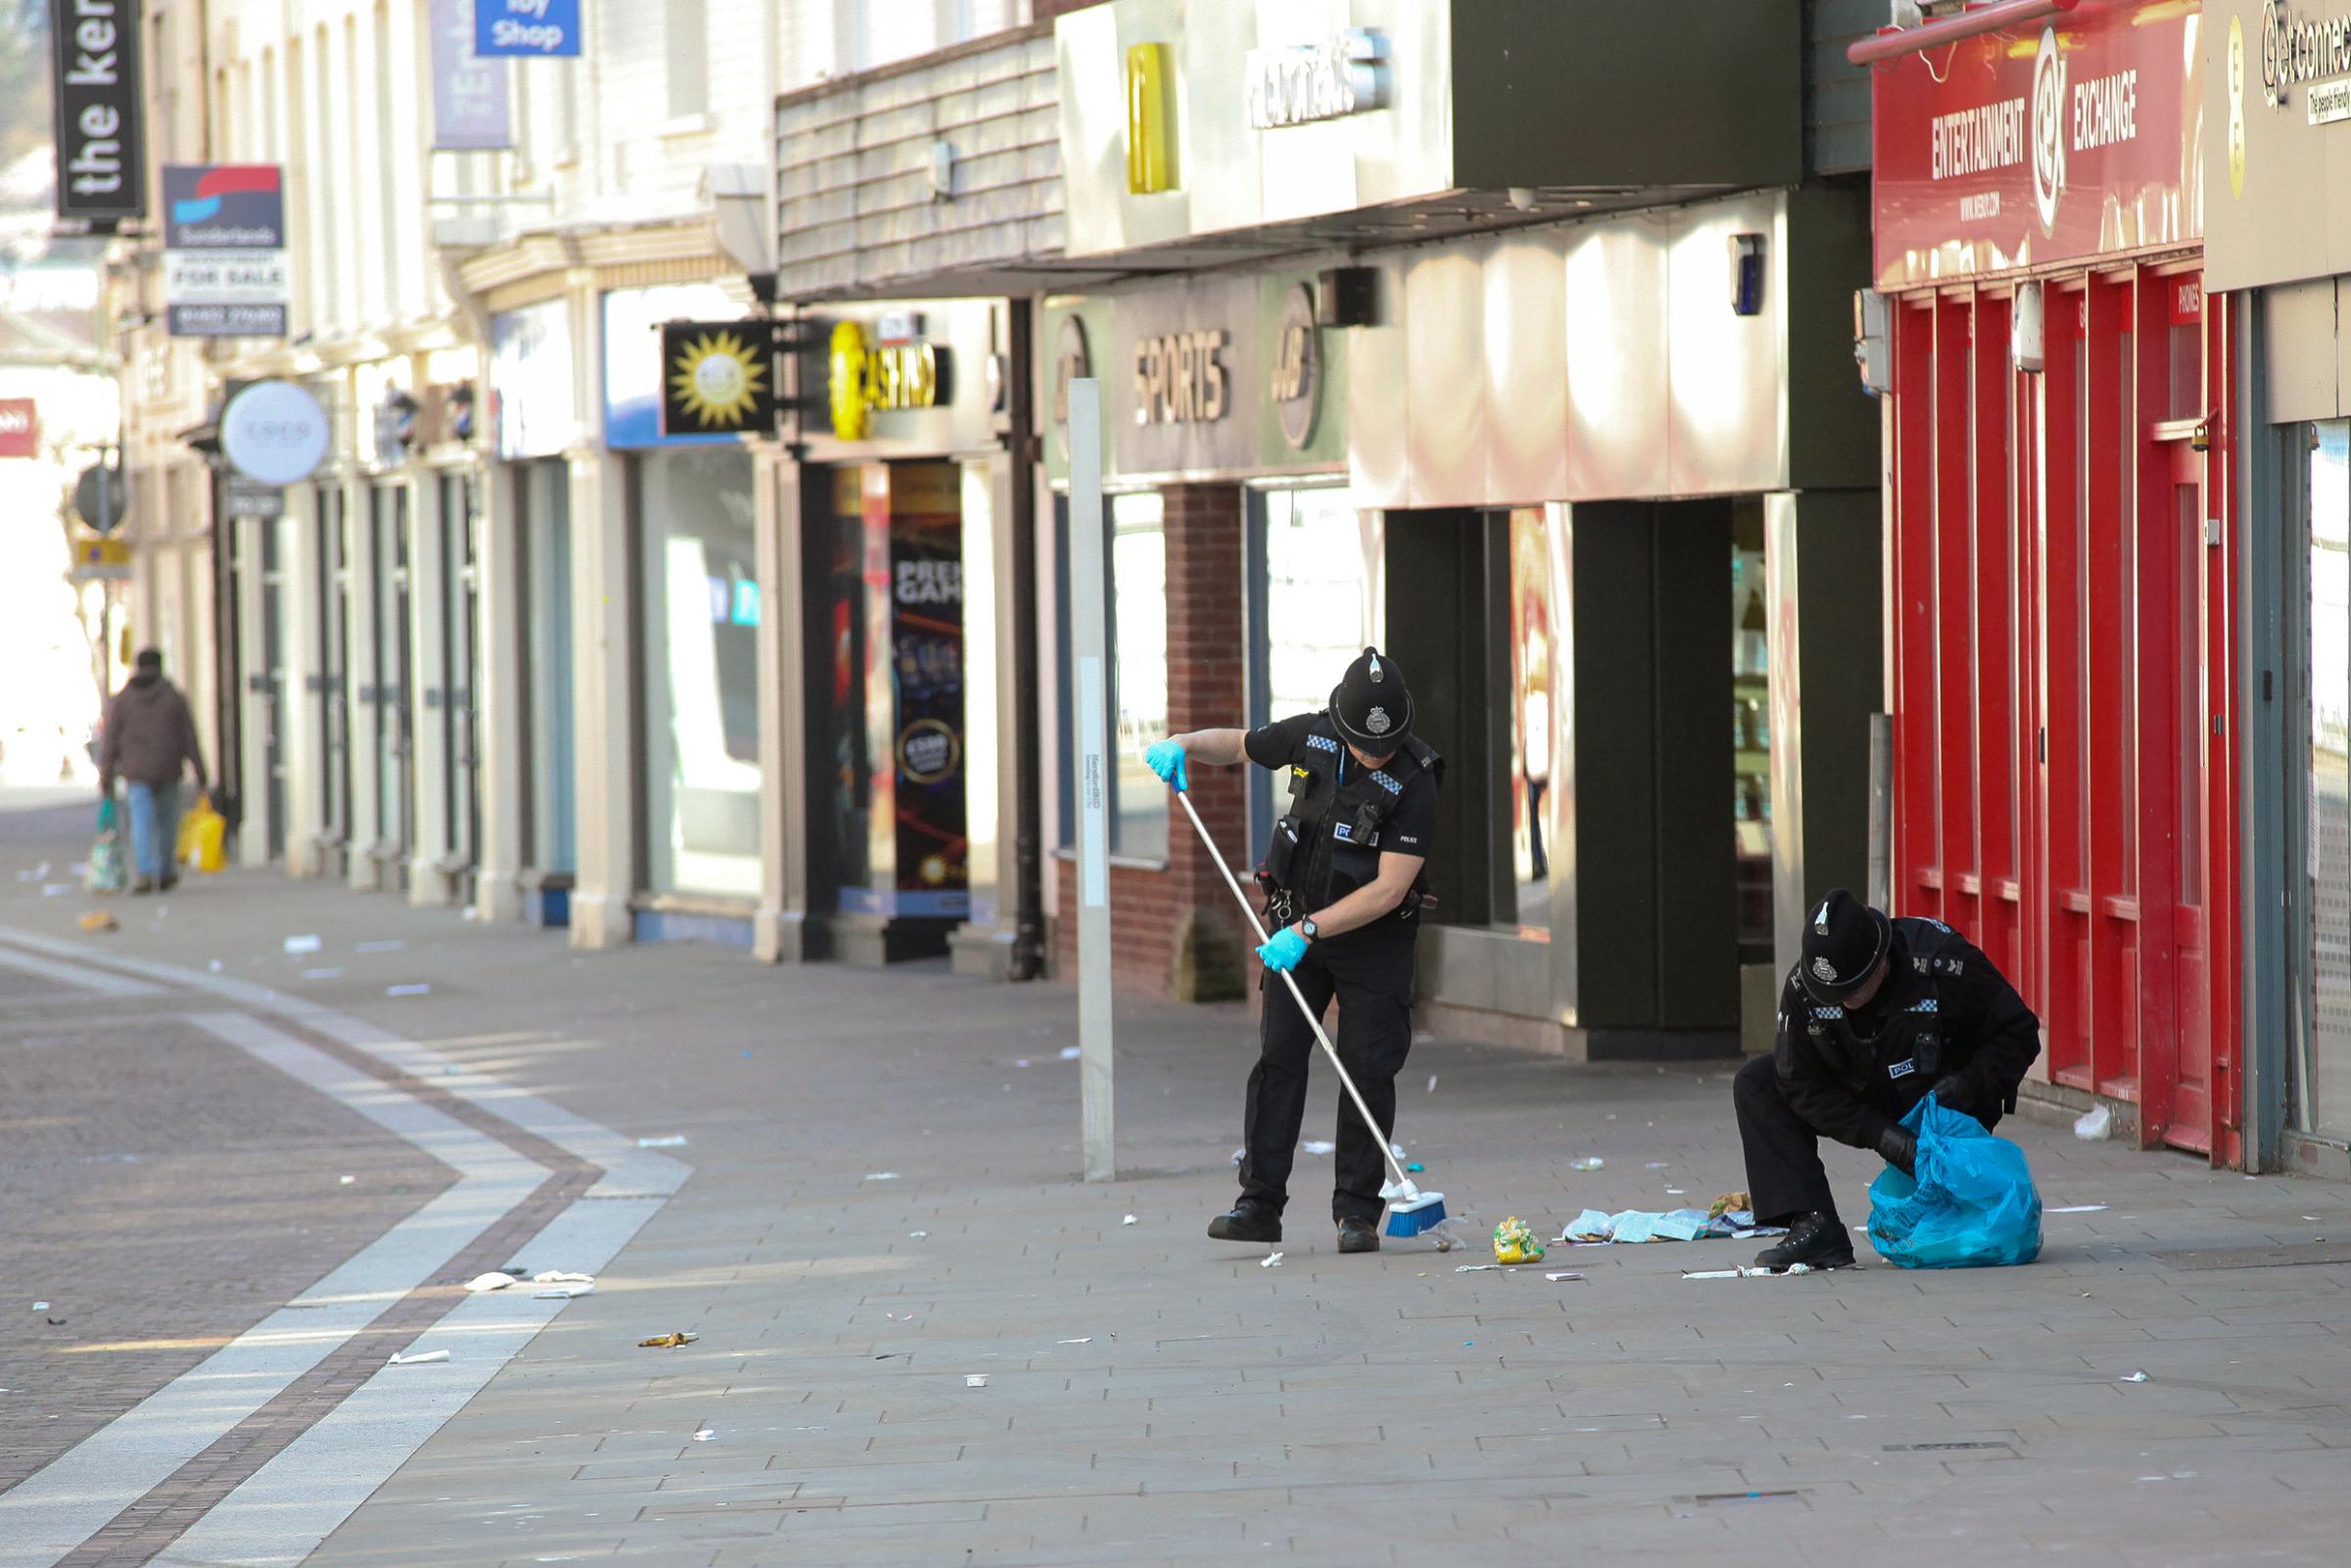 Scenes from around Hereford after Governments coronavirus lockdown...Pic is. Police clean up litter on Commercial Street in Hereford city center..